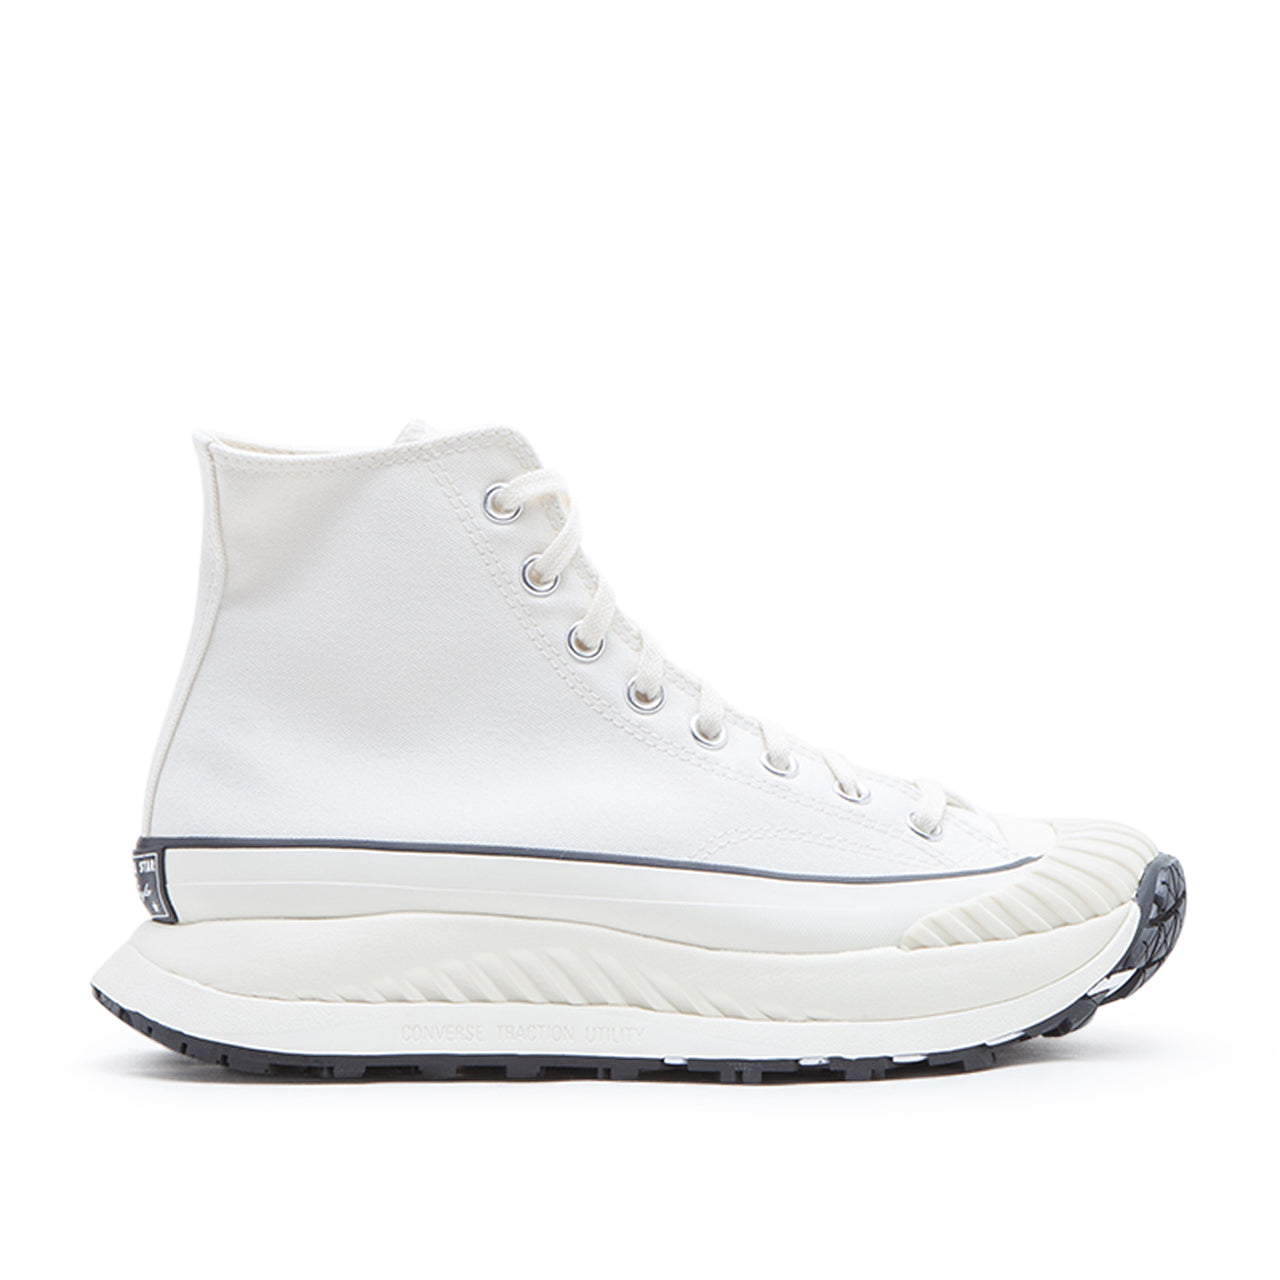 nooit Pickering voorspelling Converse Chuck 70 AT-CX (White / Black) A01682C – Allike Store